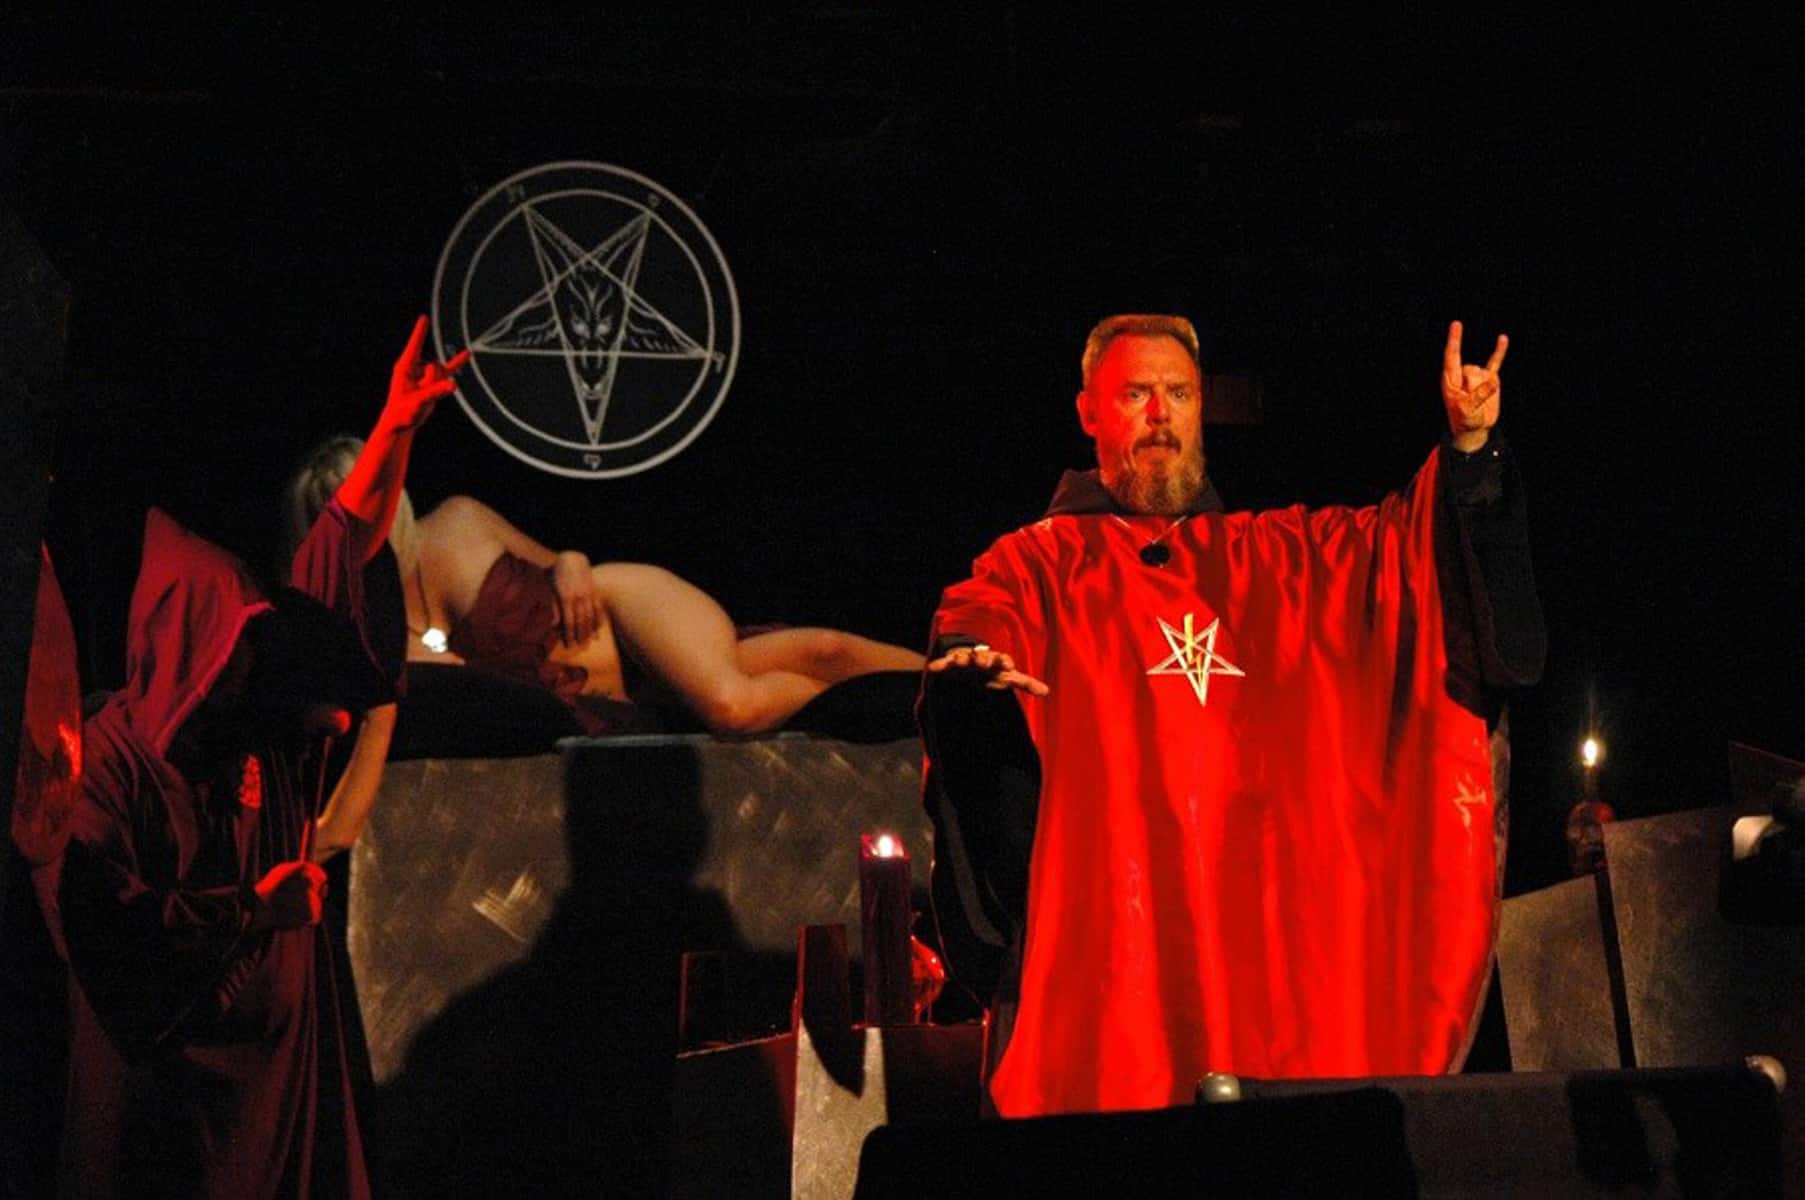 Priest guilty of threesome atop altar in satanic ritual